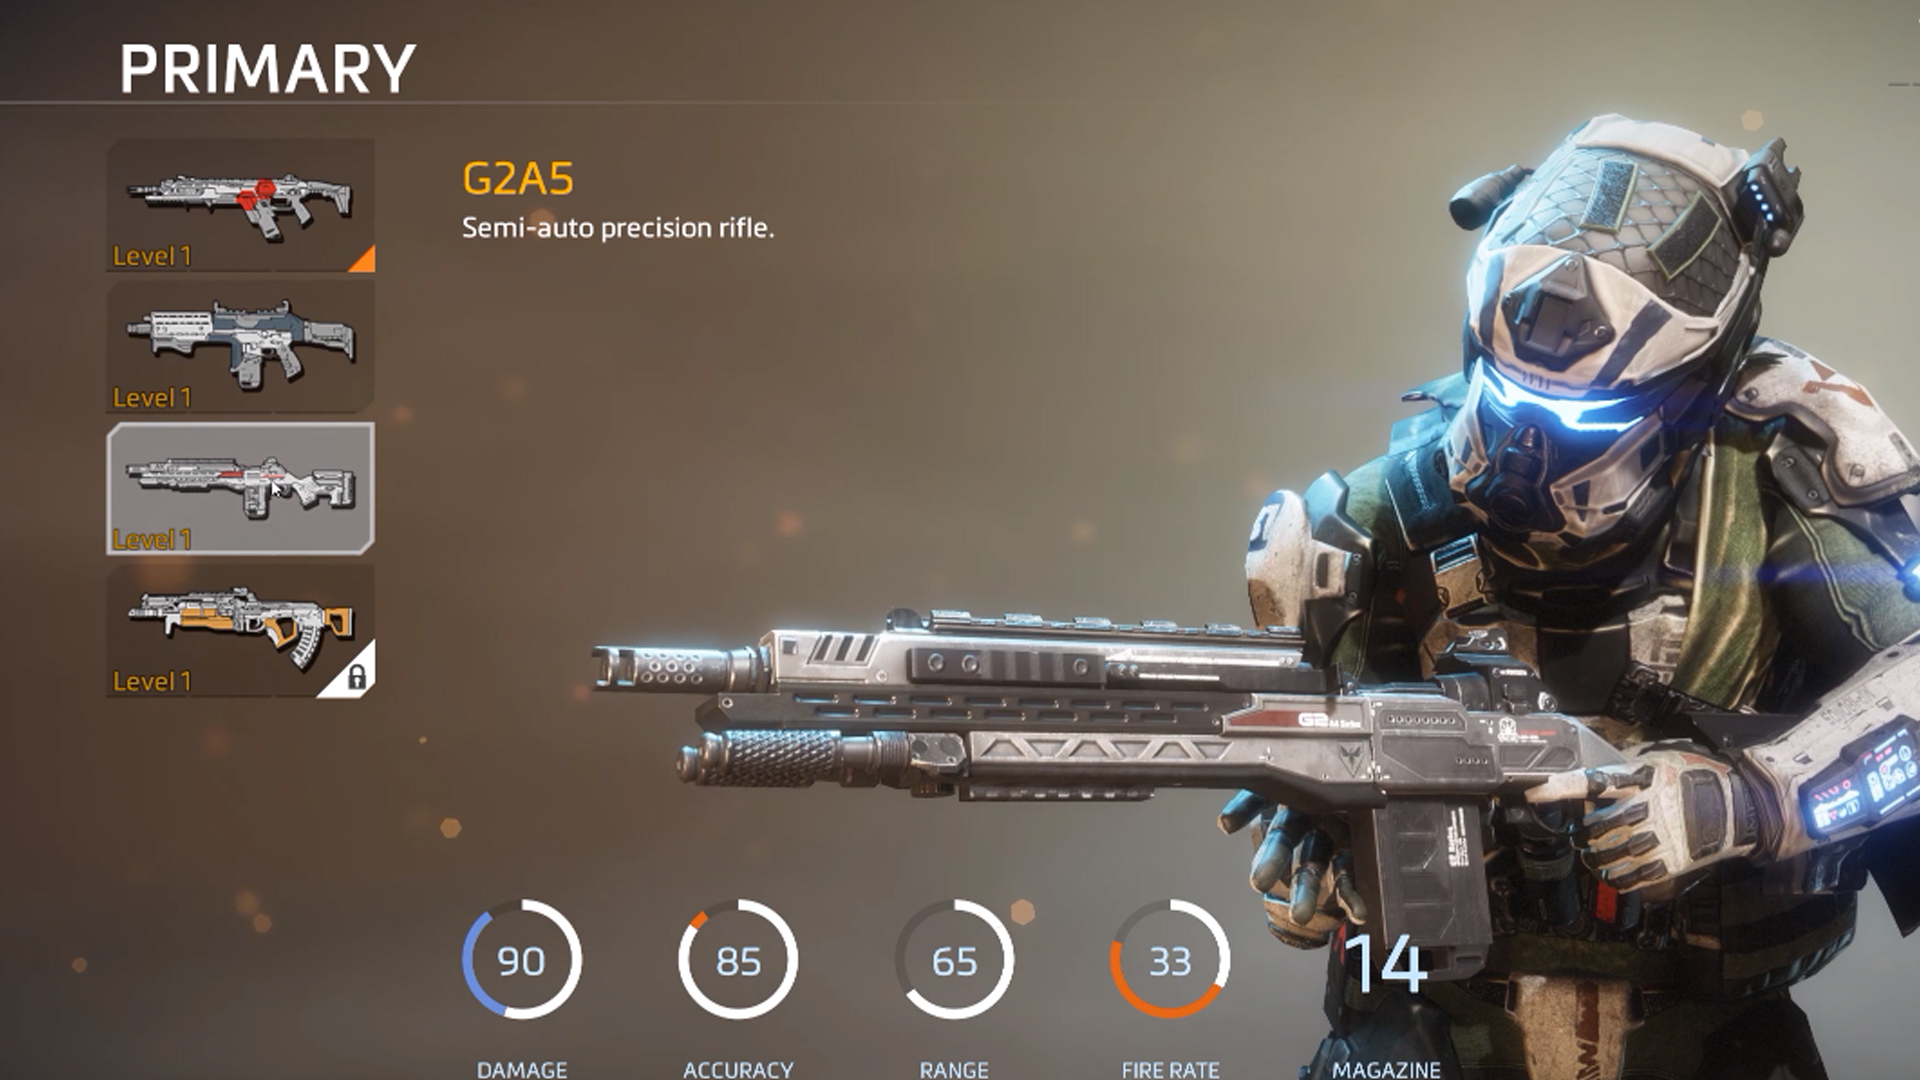 Primary - G2A5